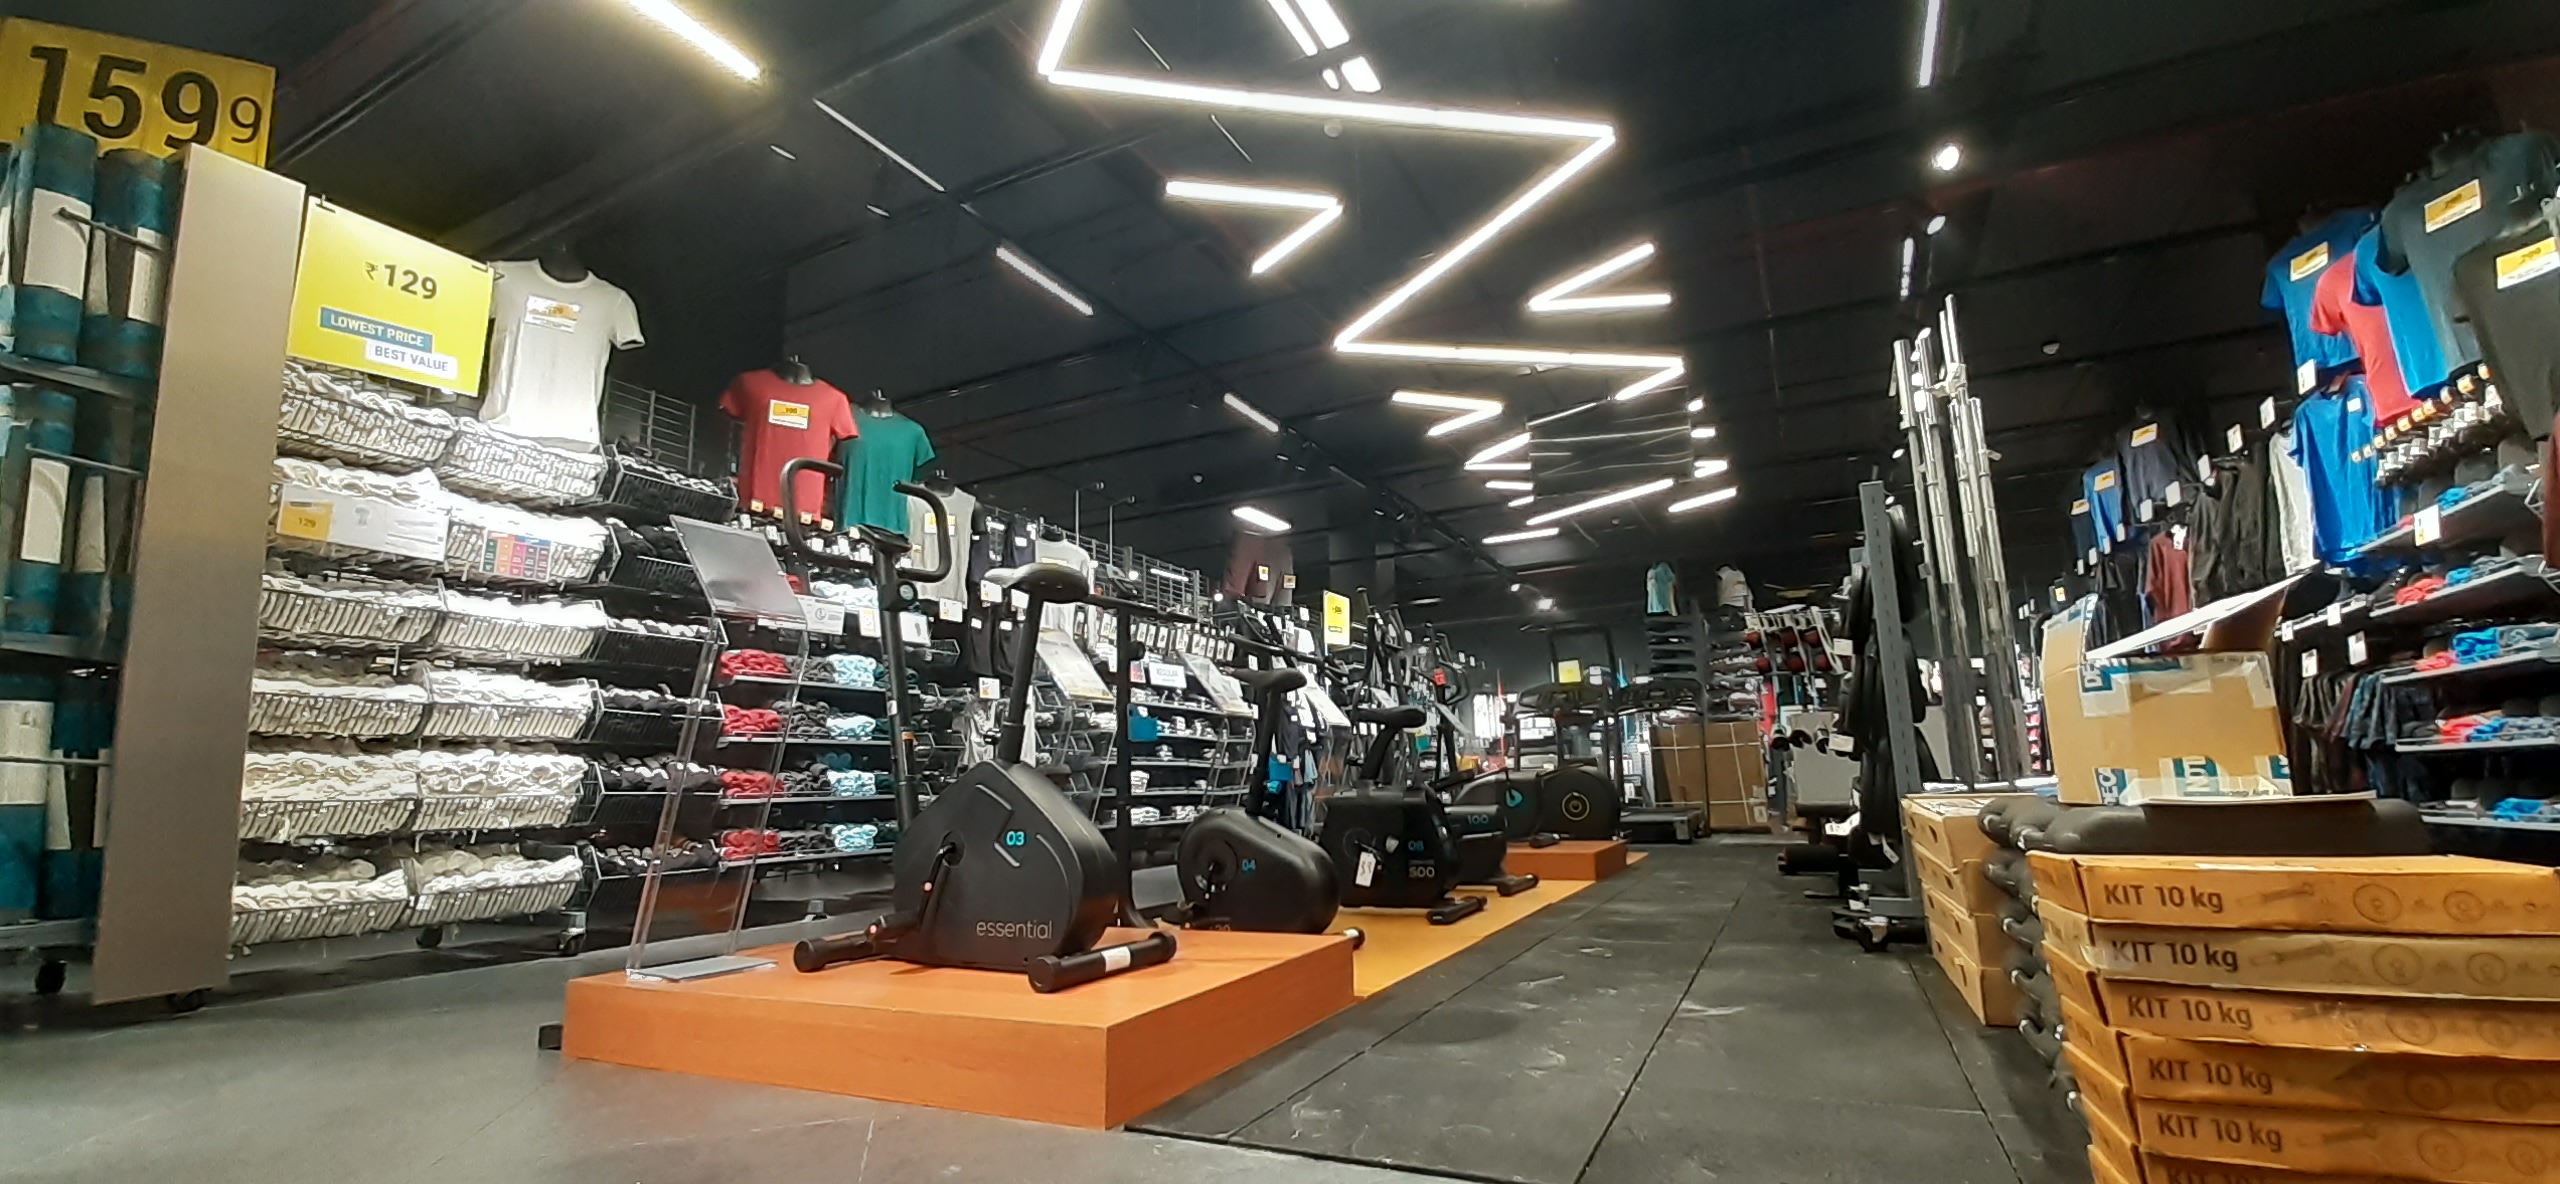 Decathlon expands its wings with its 